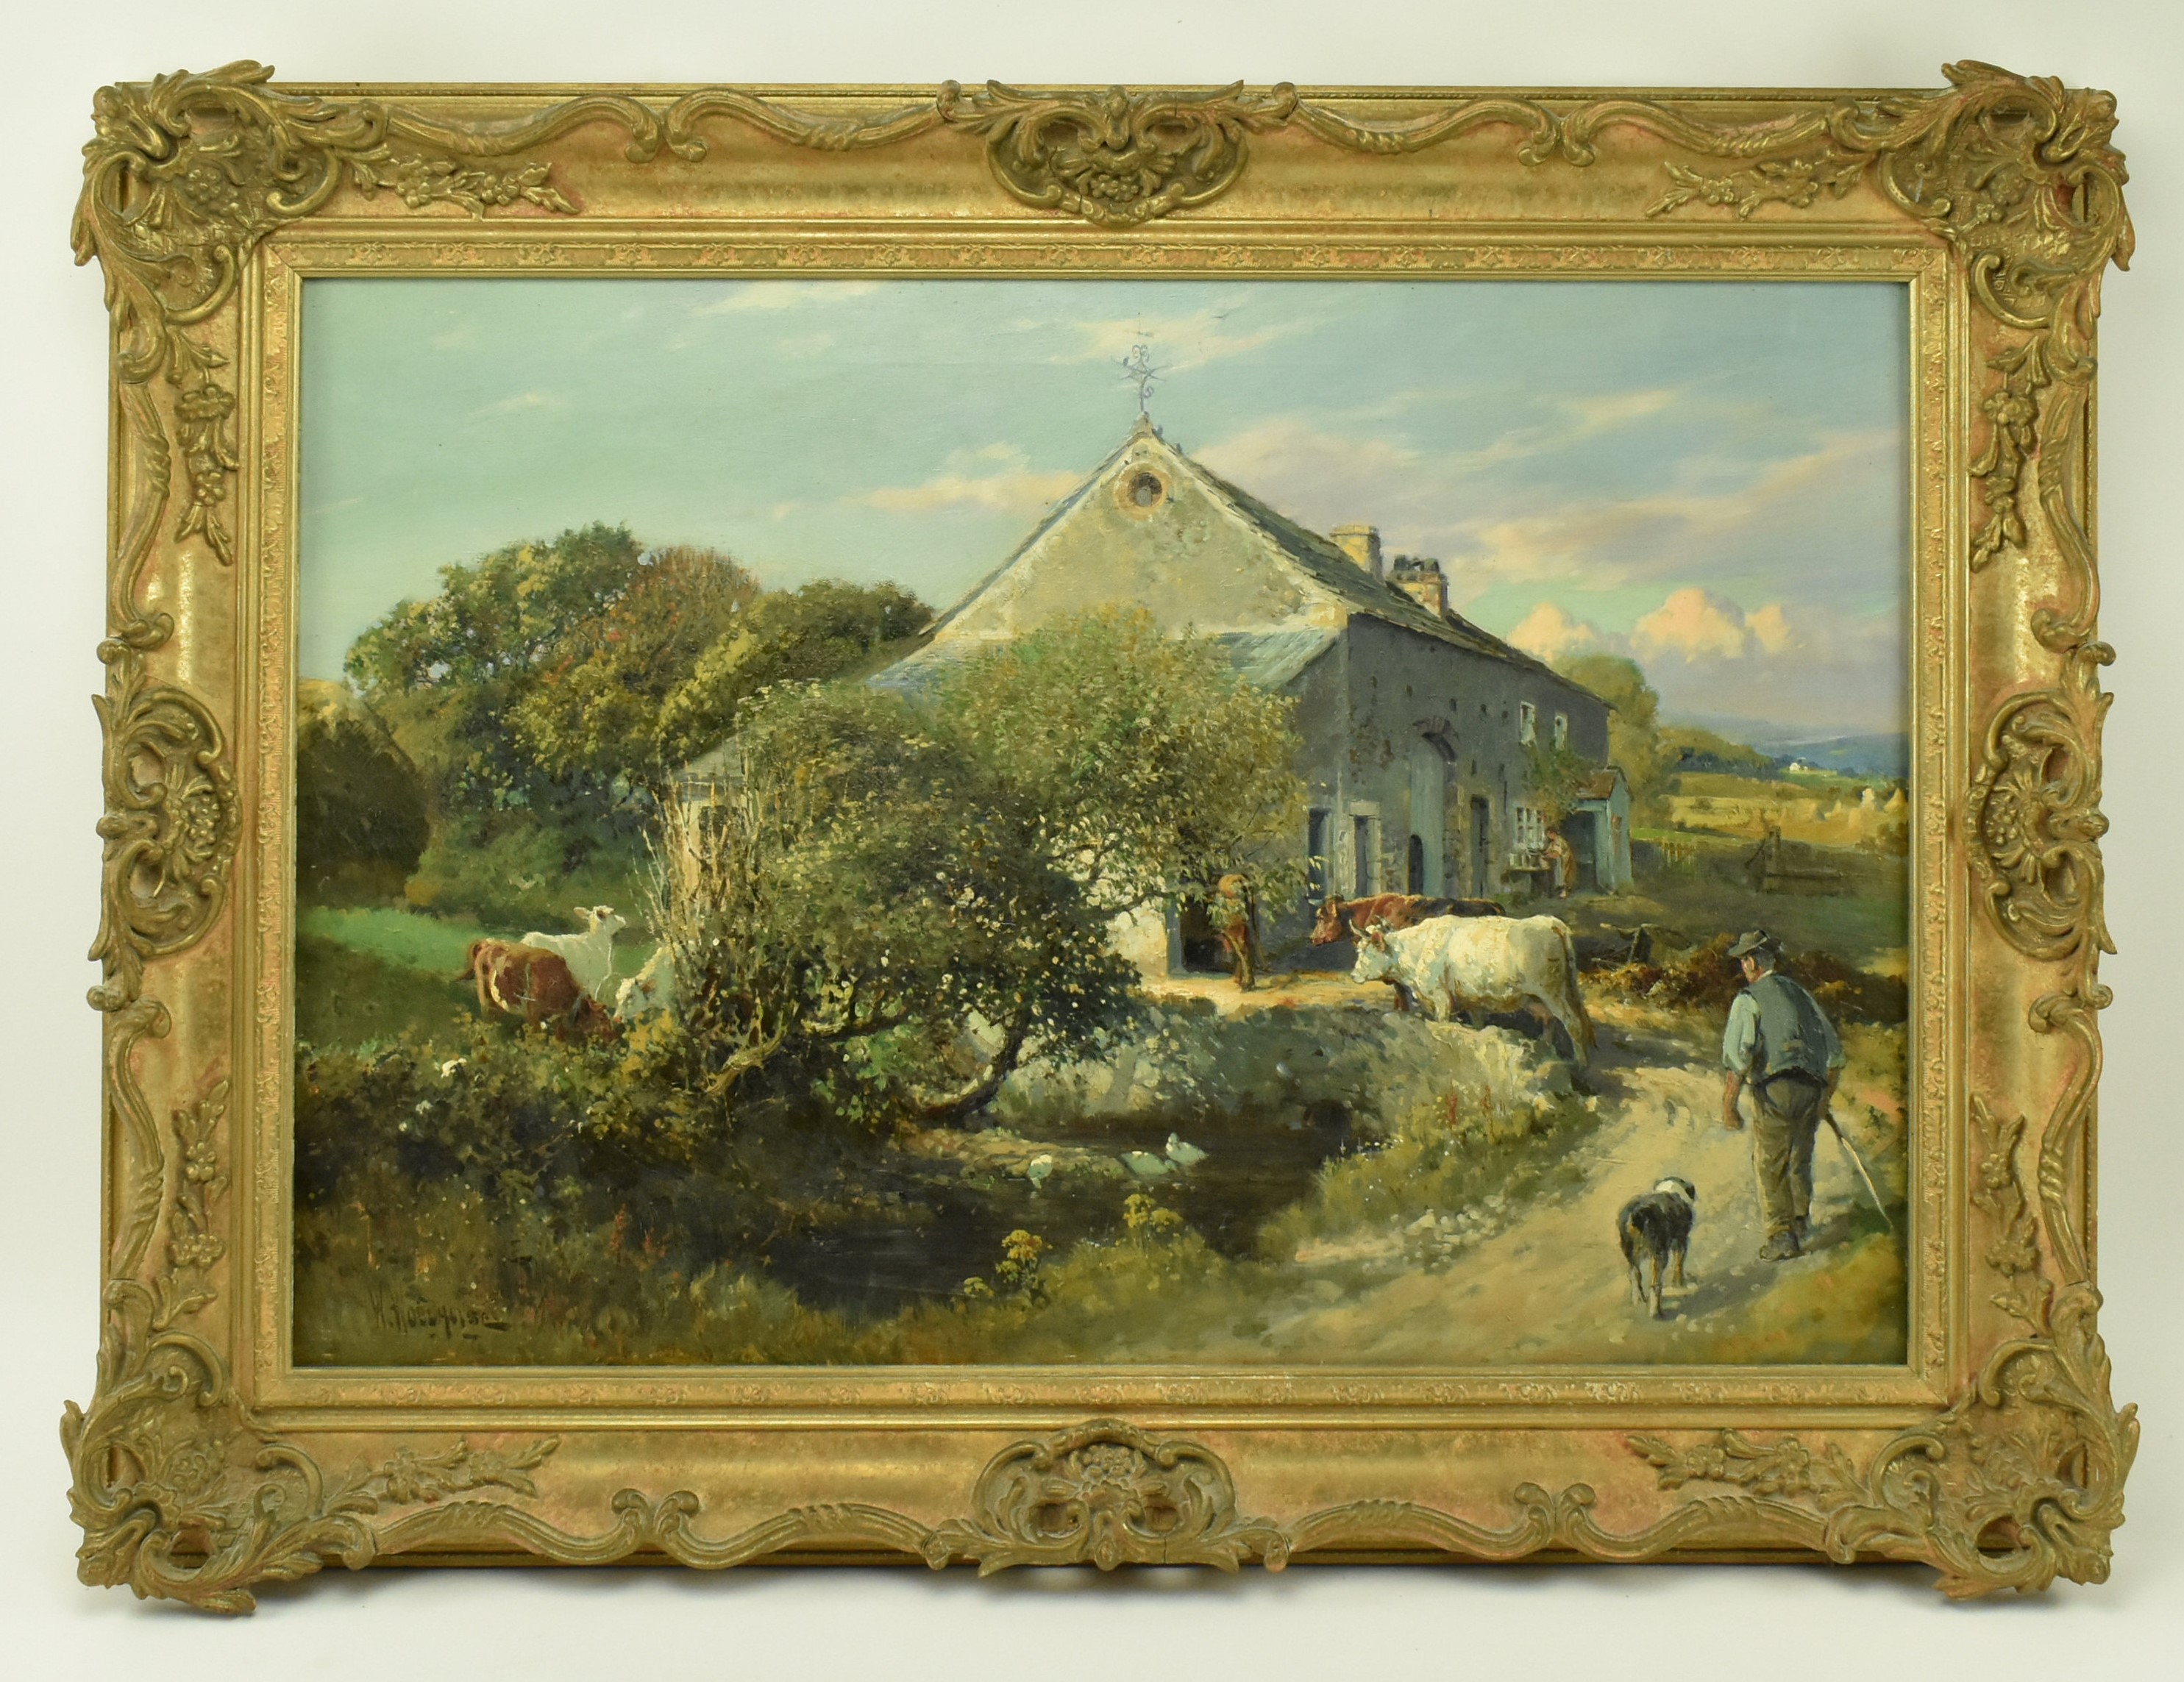 ATTRIBUTED TO WILLIAM WOODHOUSE (1857-1929) - OIL ON CANVAS - Image 2 of 6